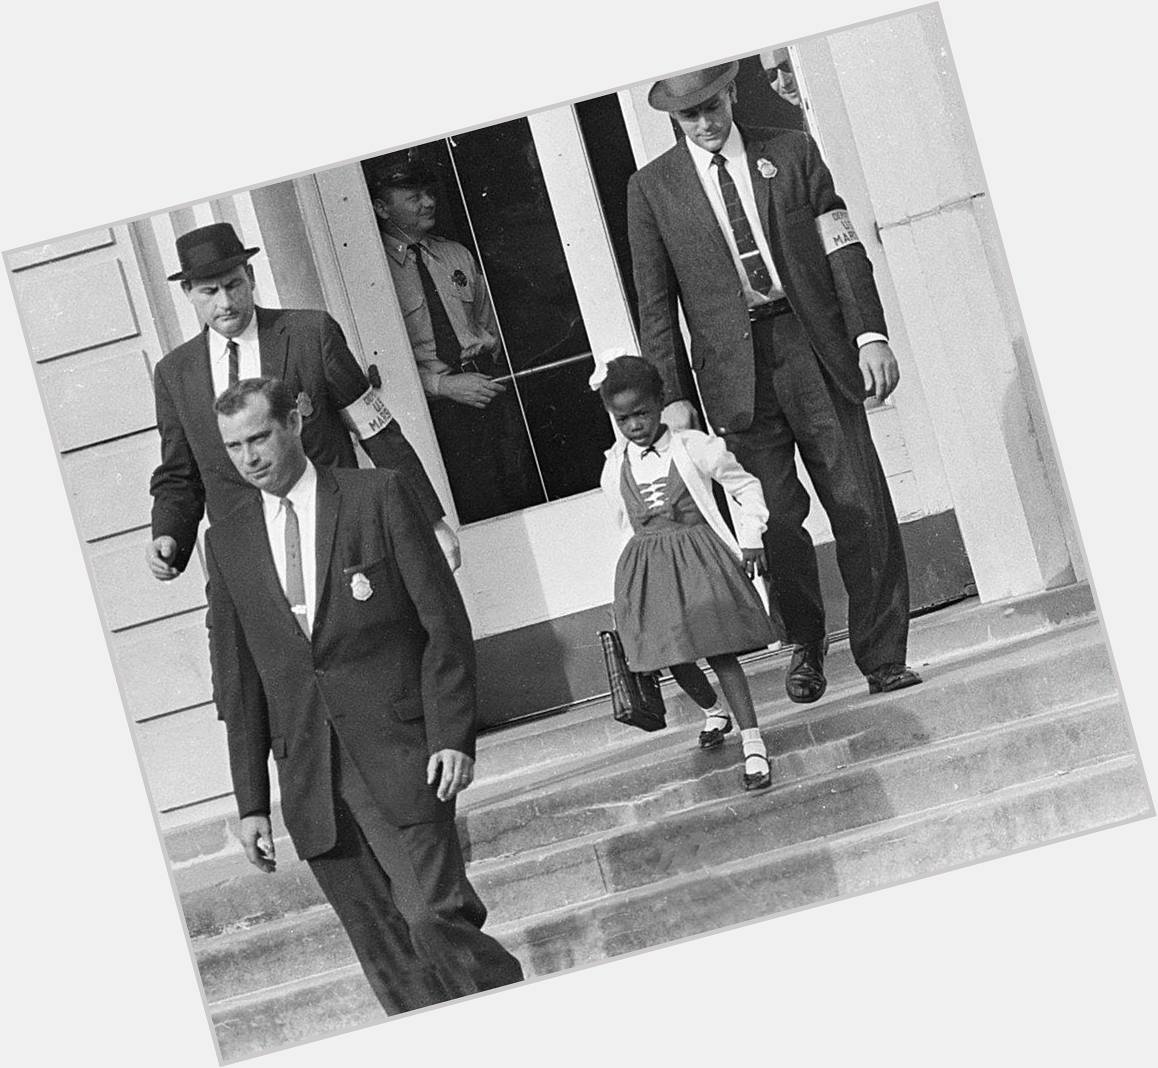 Happy Birthday to Ruby Bridges! The first black child to attend an all white school in the South. 